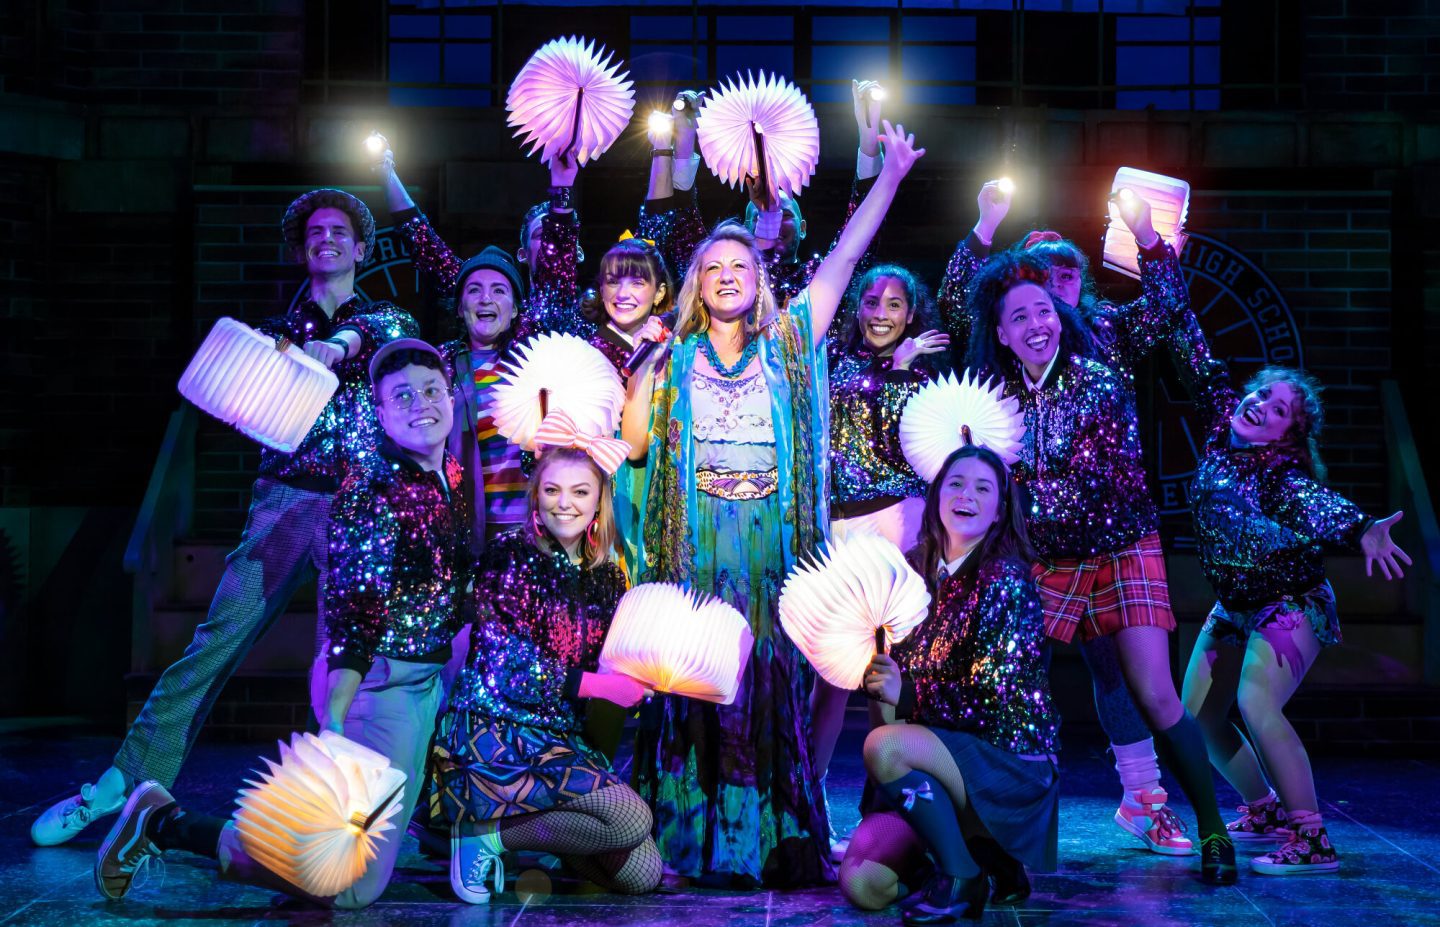 Heathers the Musical cast holding fans that light up and standing all together, some also holding torches.